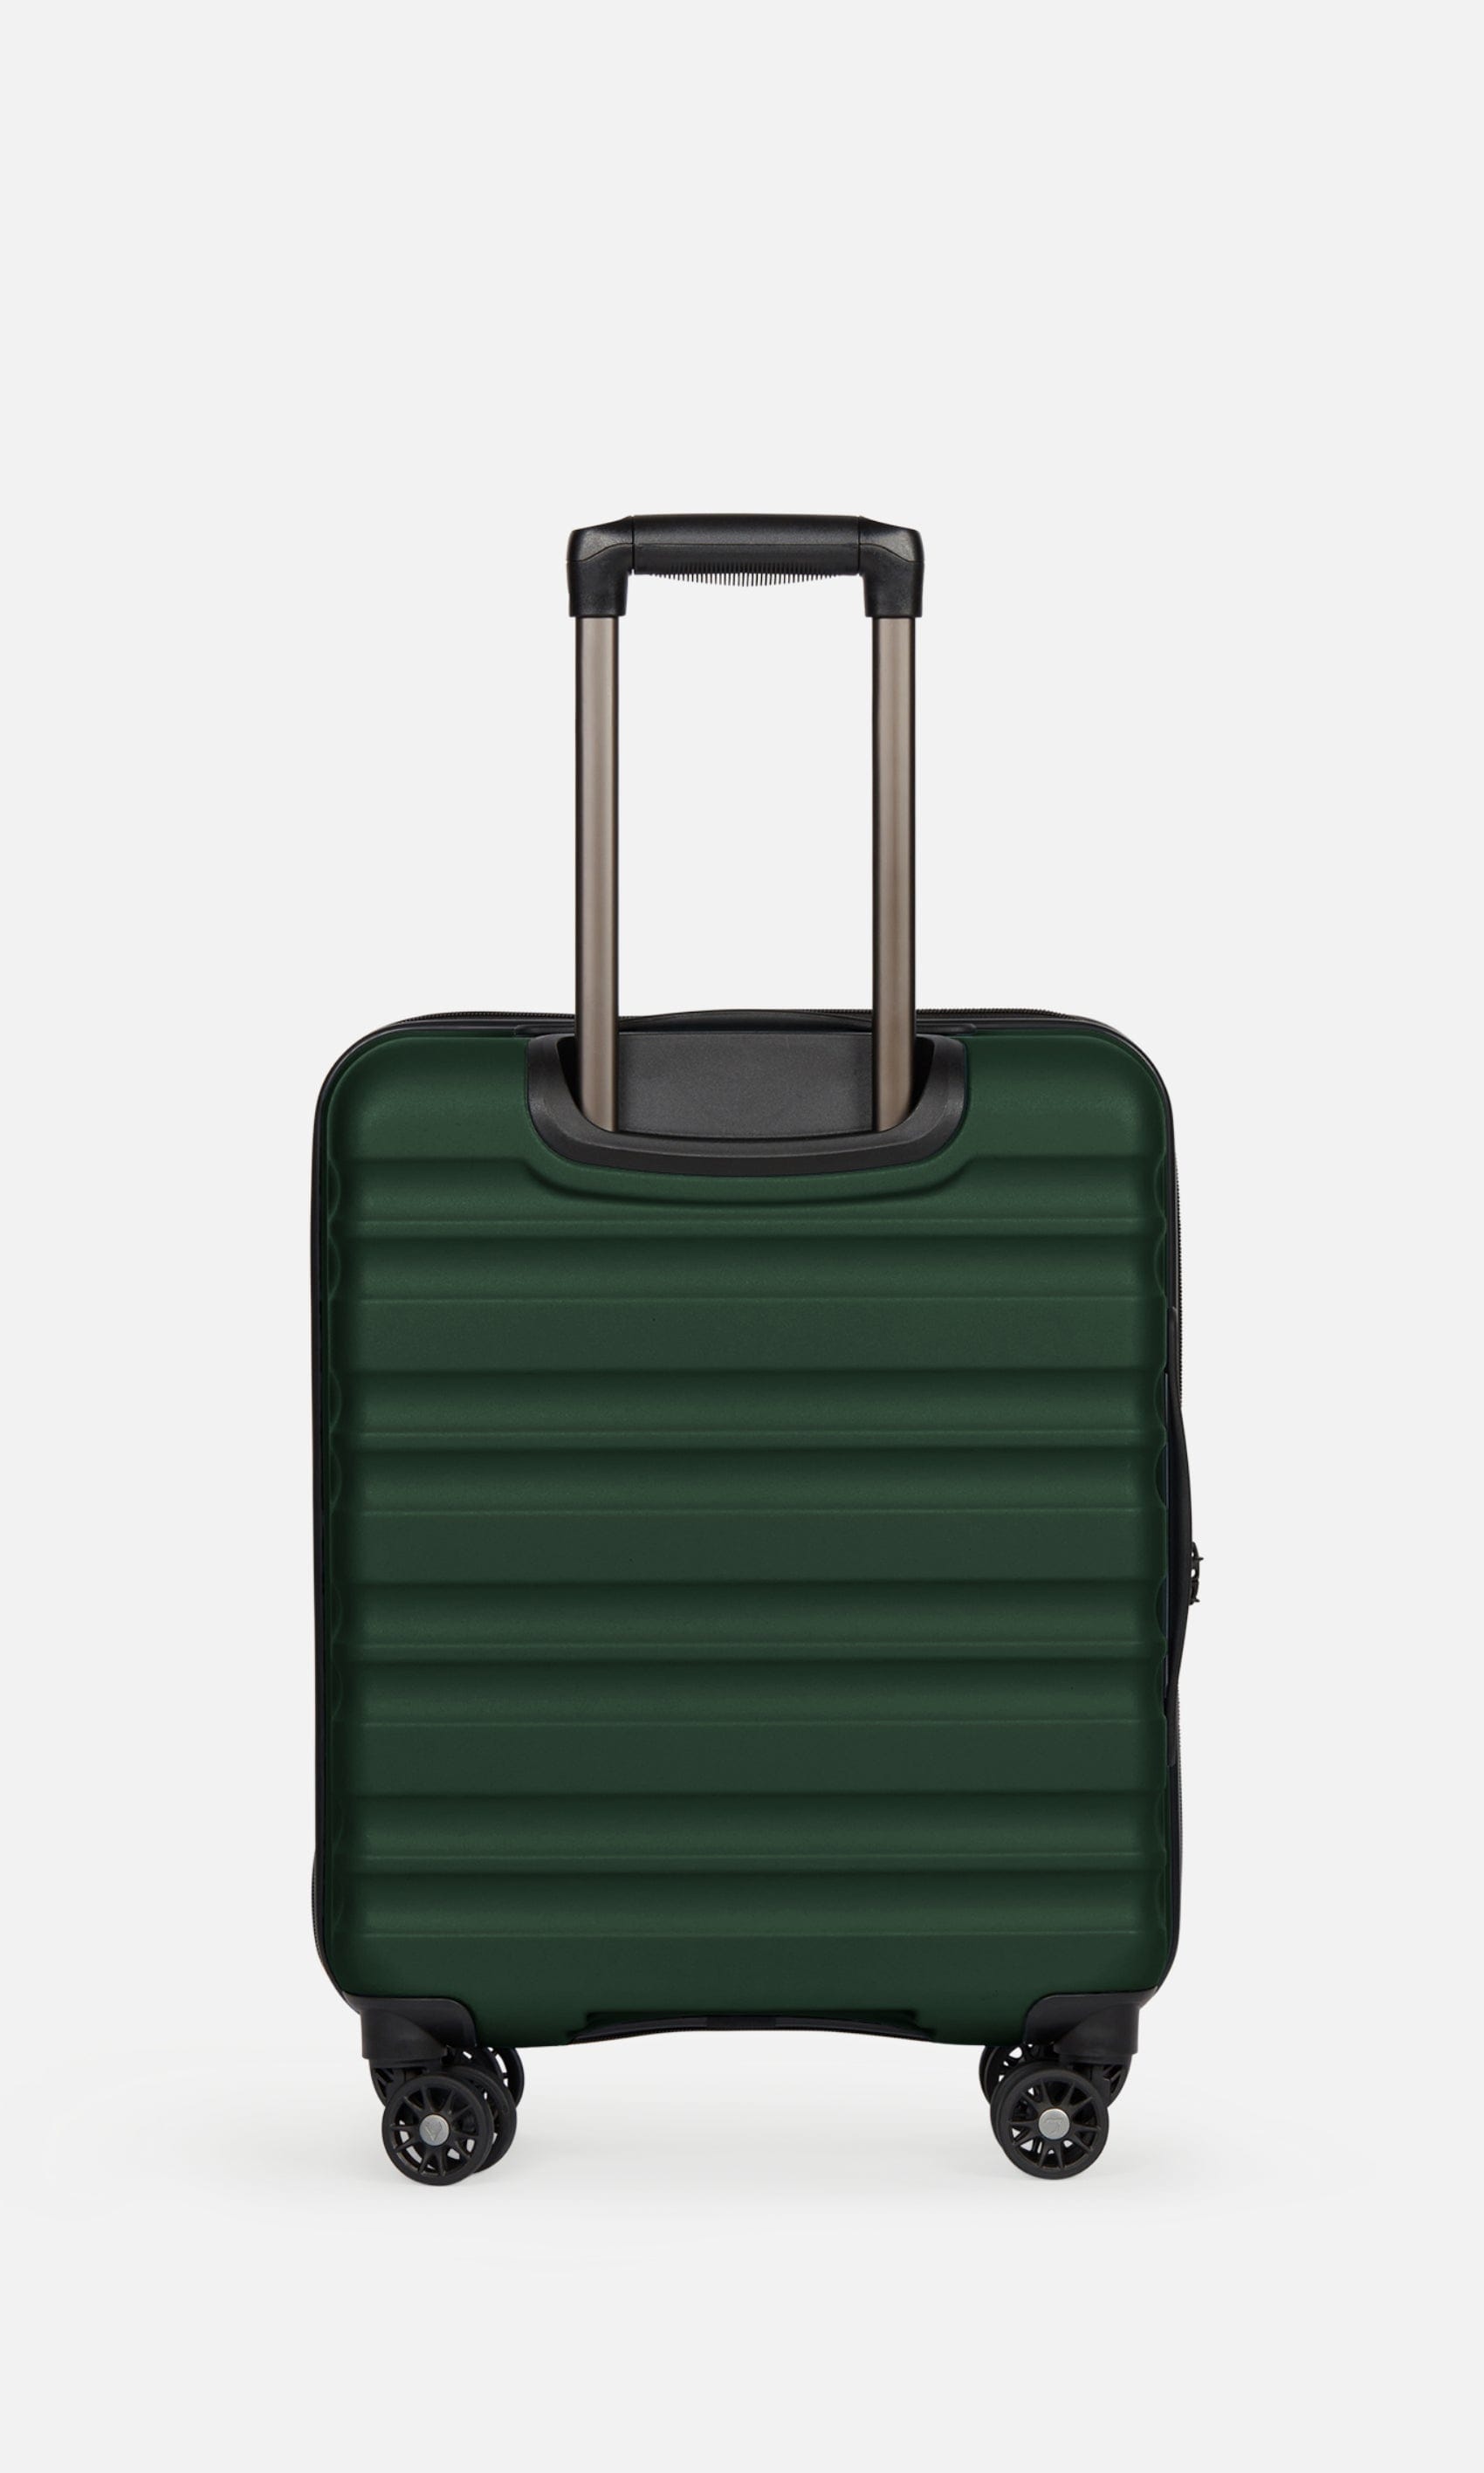 Antler Luggage -  Clifton cabin in woodland green - Hard Suitcases Clifton Cabin Suitcase 55x40x20cm Green | Hard Suitcase | Antler UK